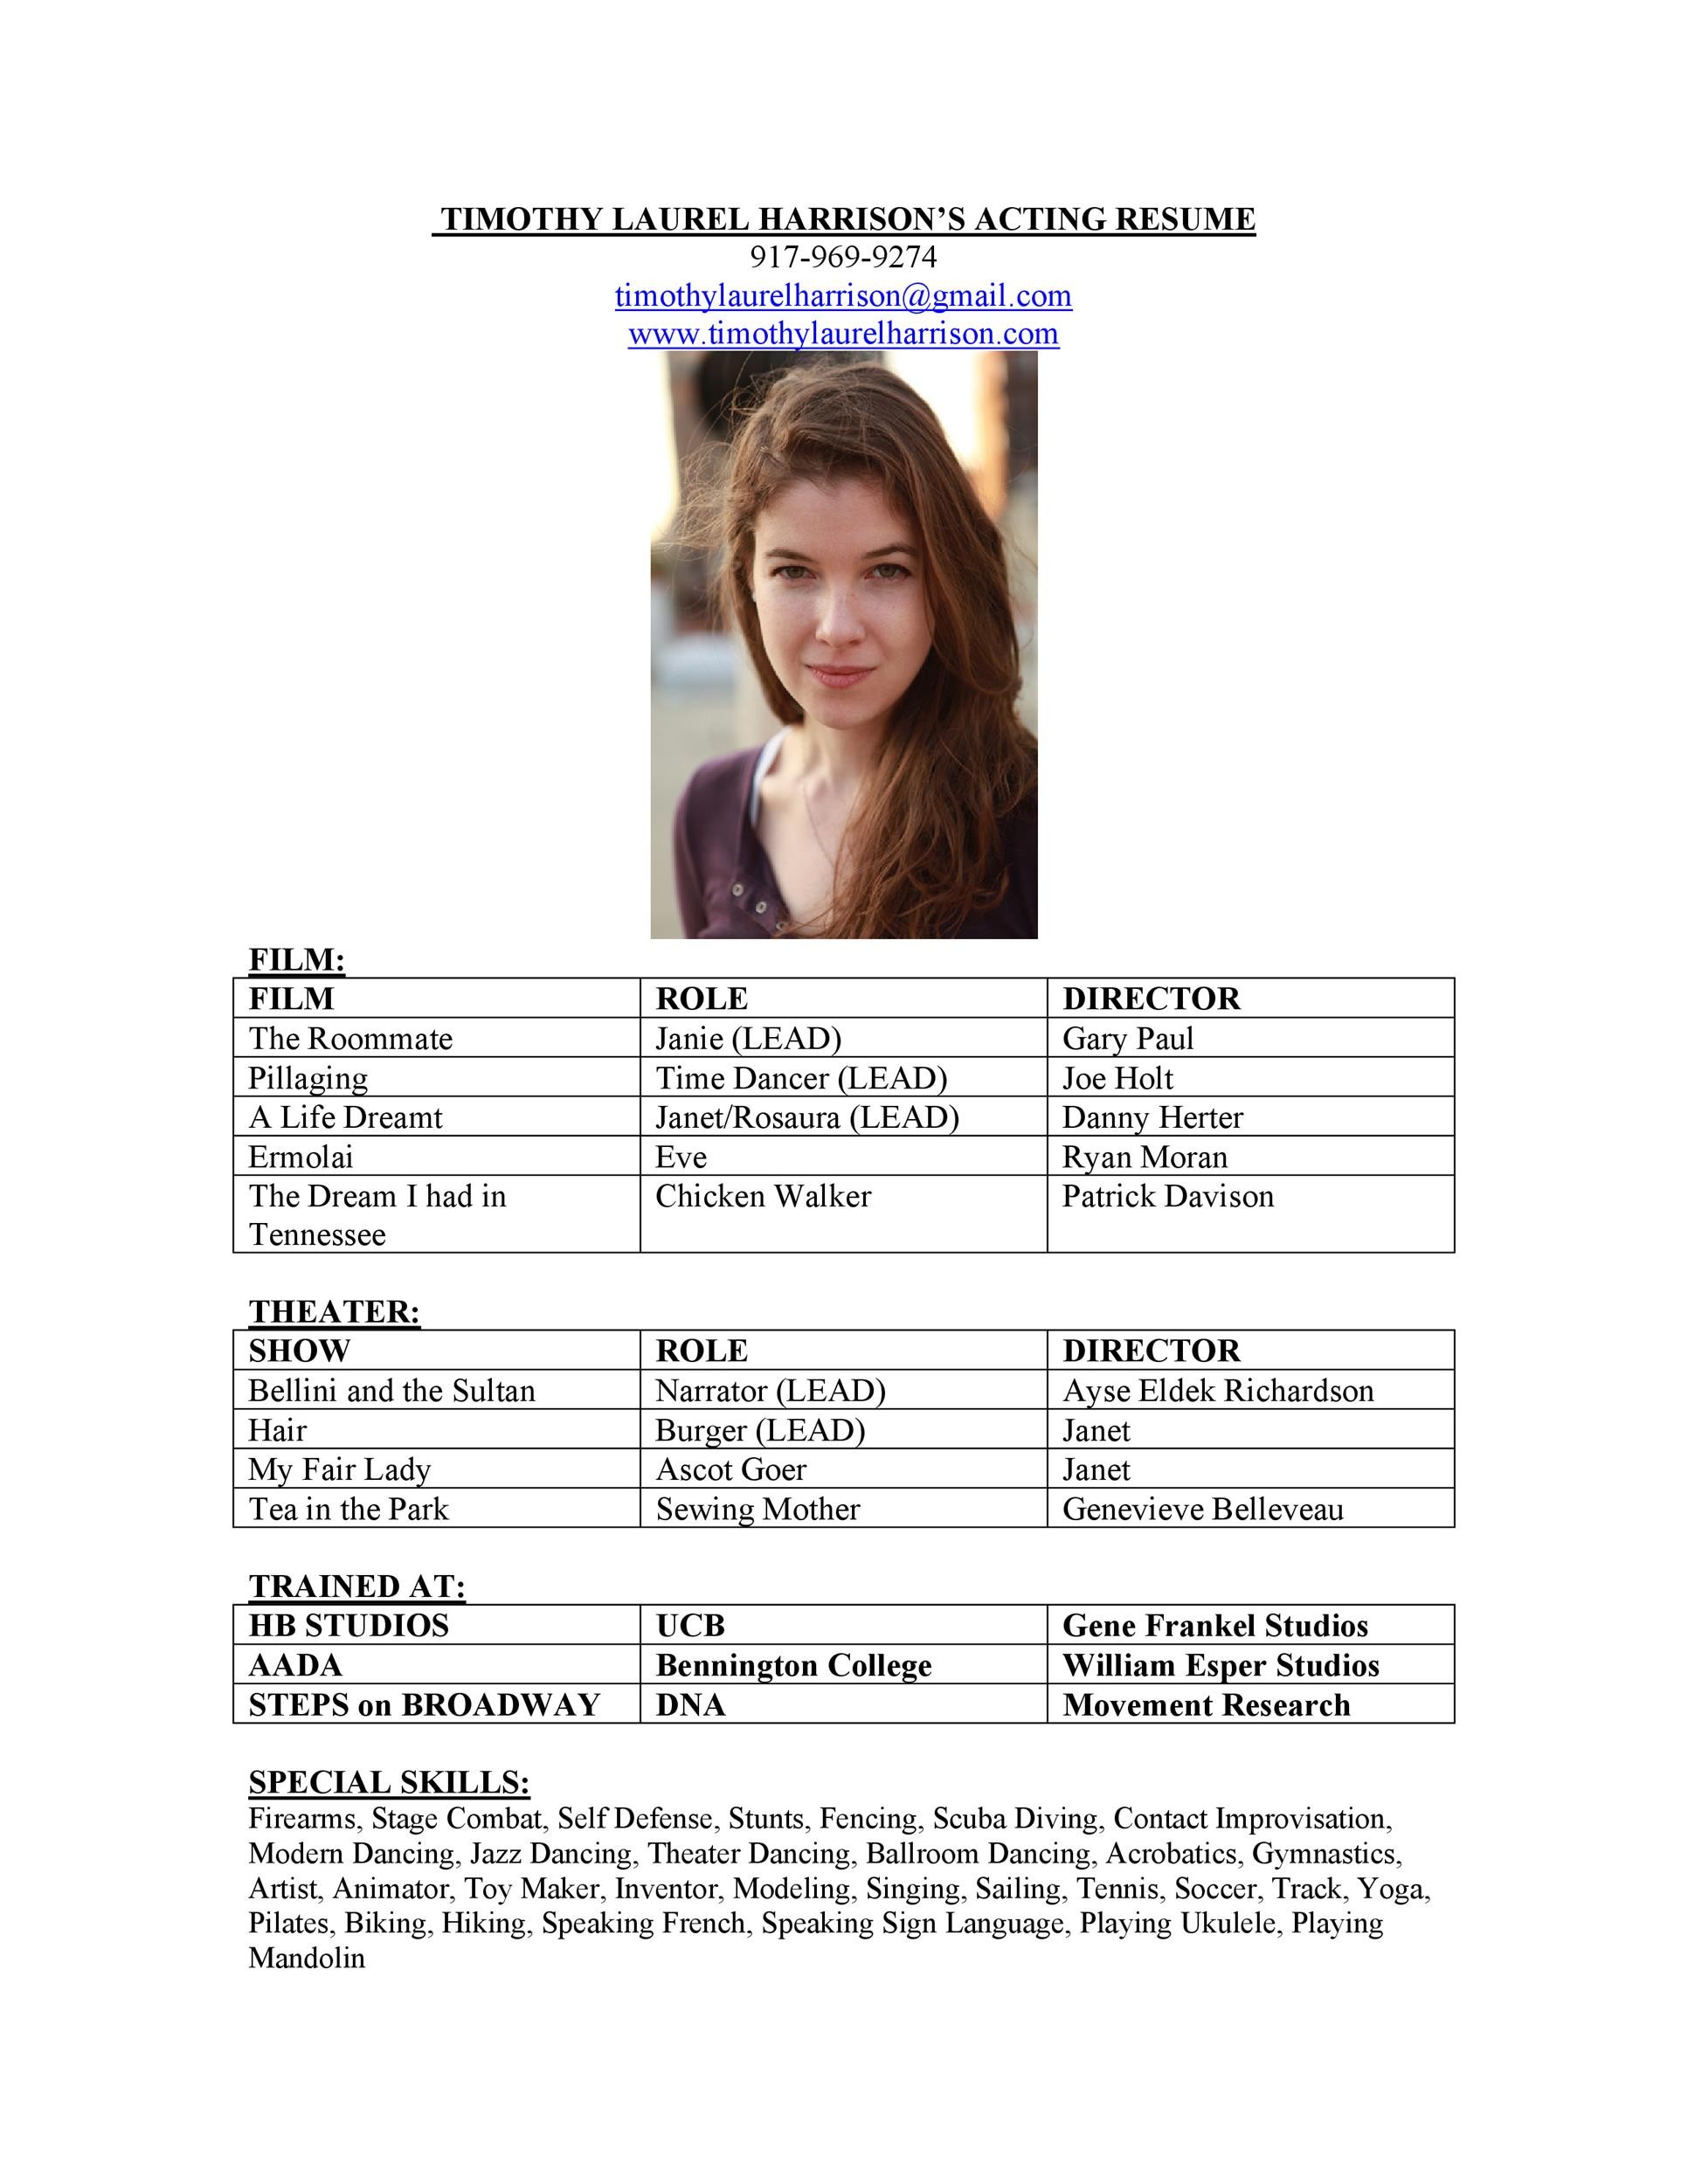 Free acting resume template 23